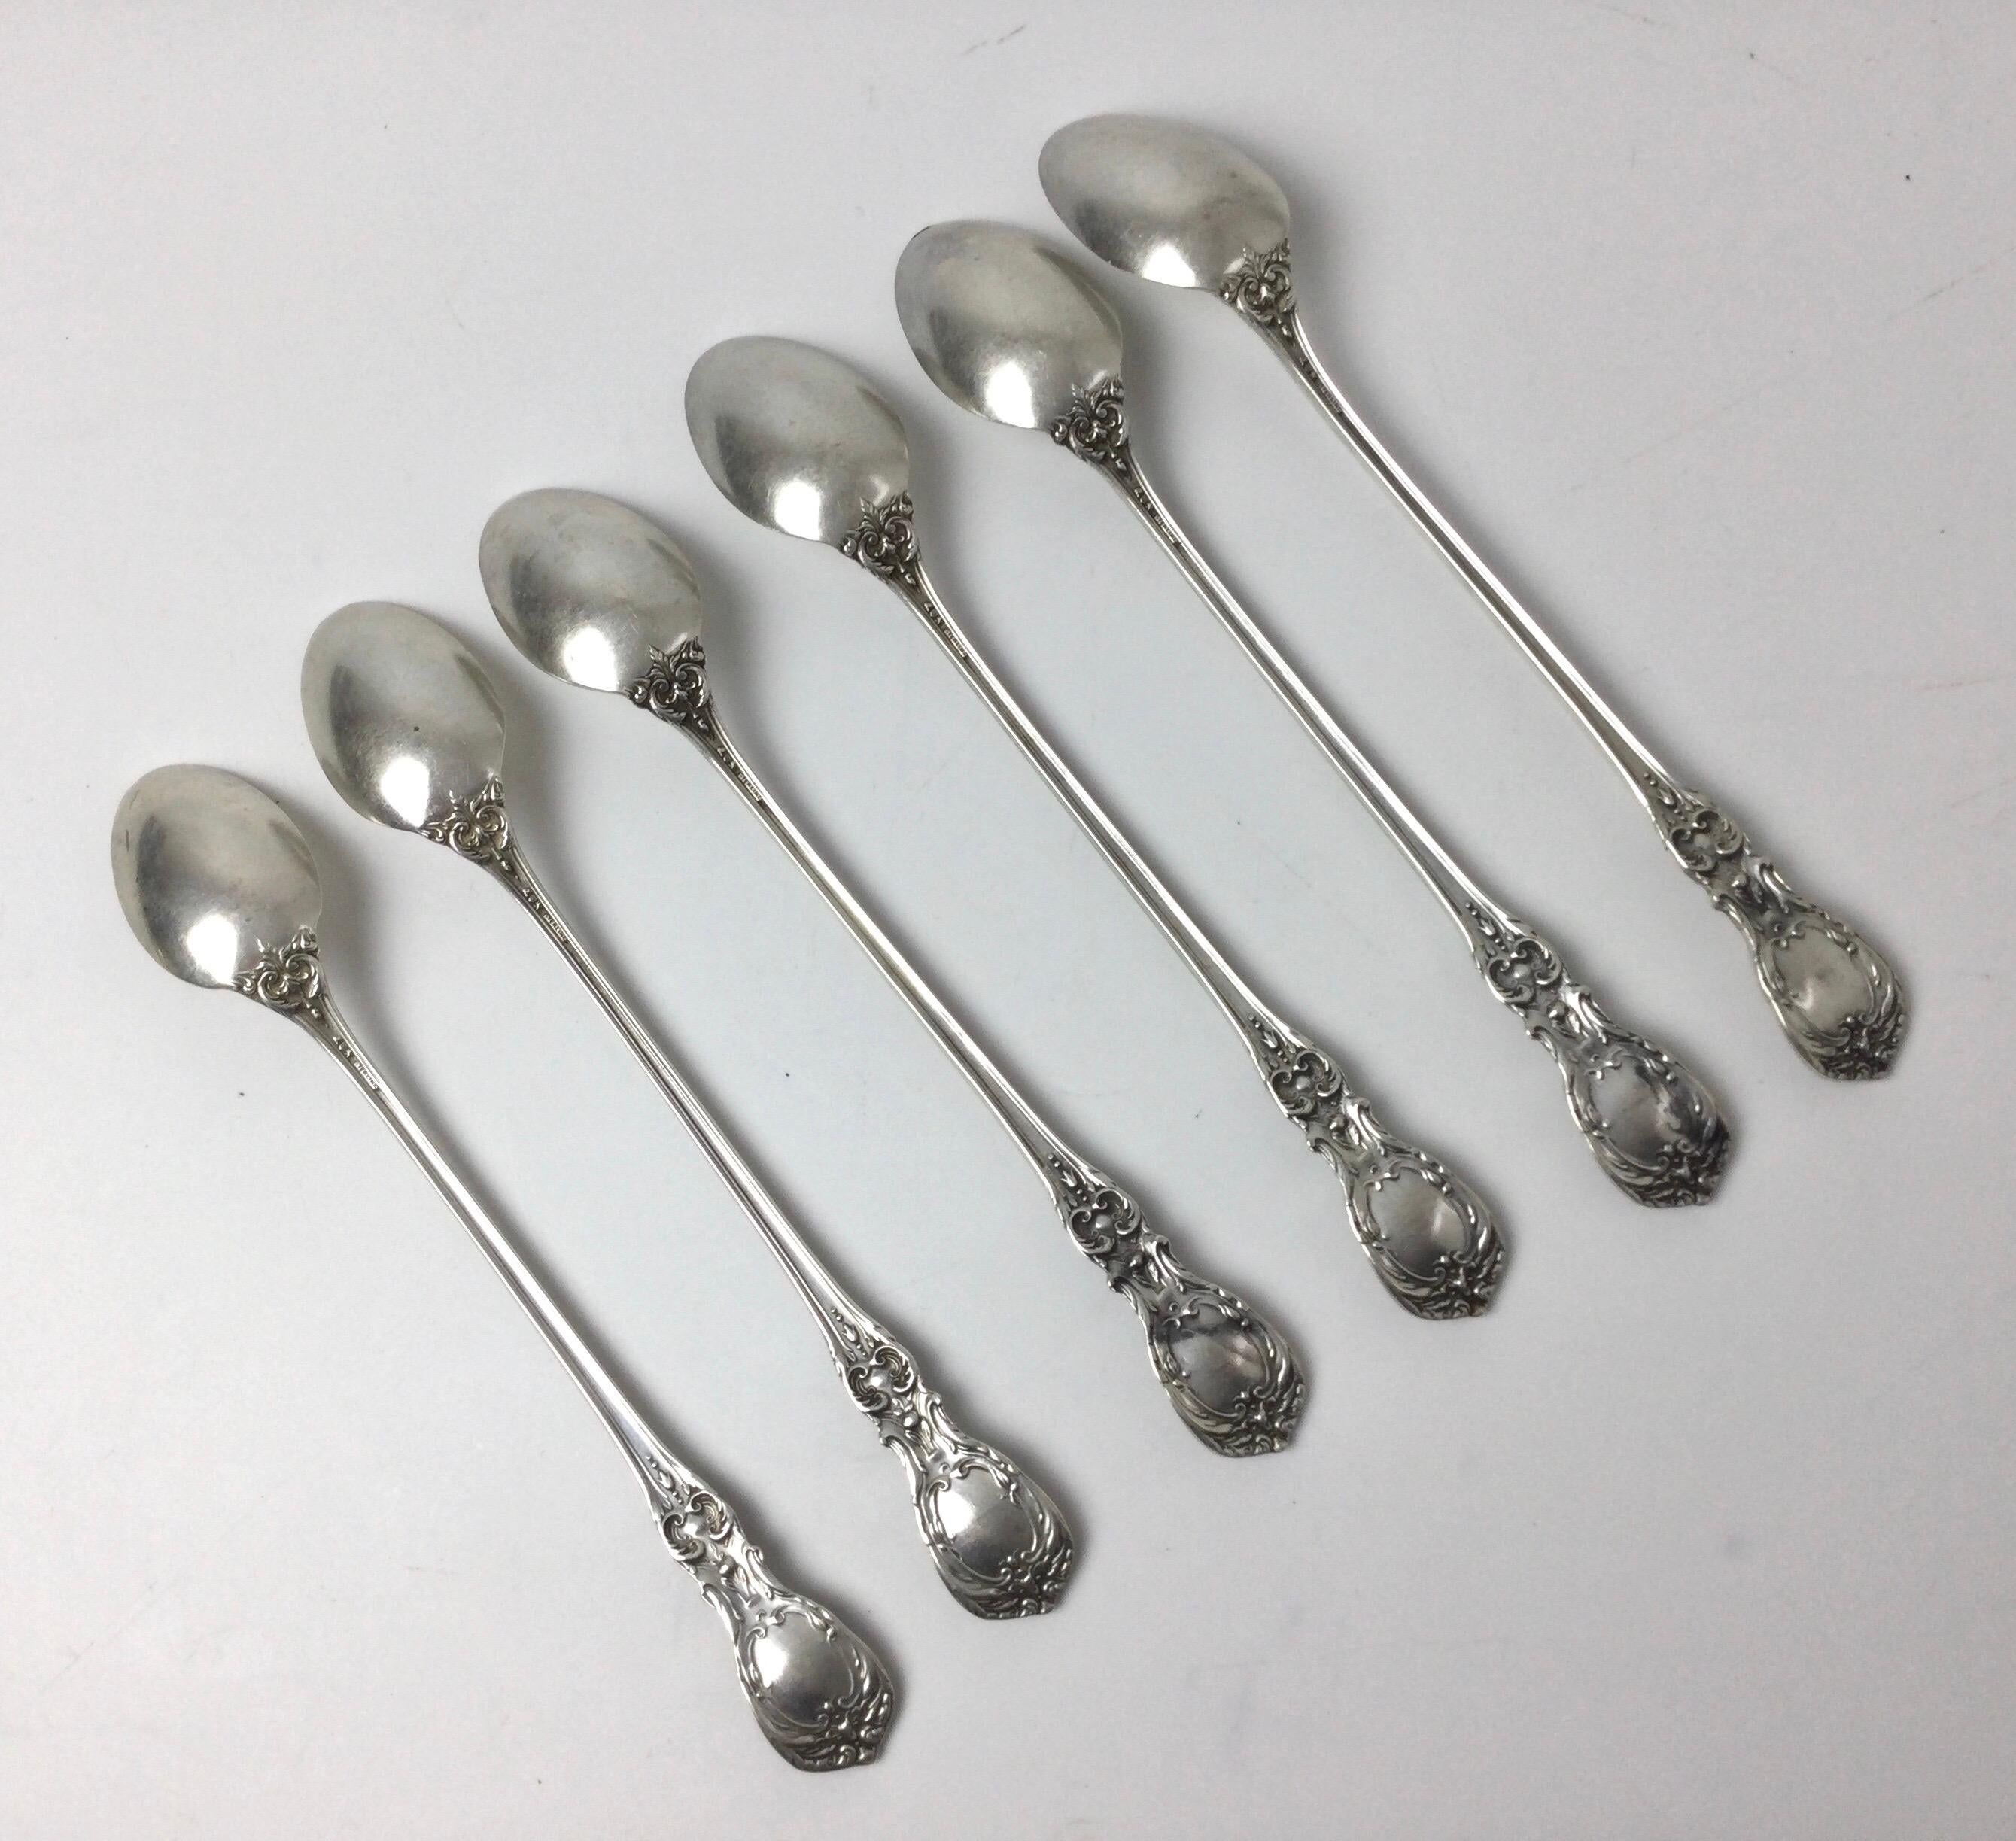 VERY GOOD CONDITION REED & BARTON FRAGRANCE STERLING SILVER ICED TEA SPOON 